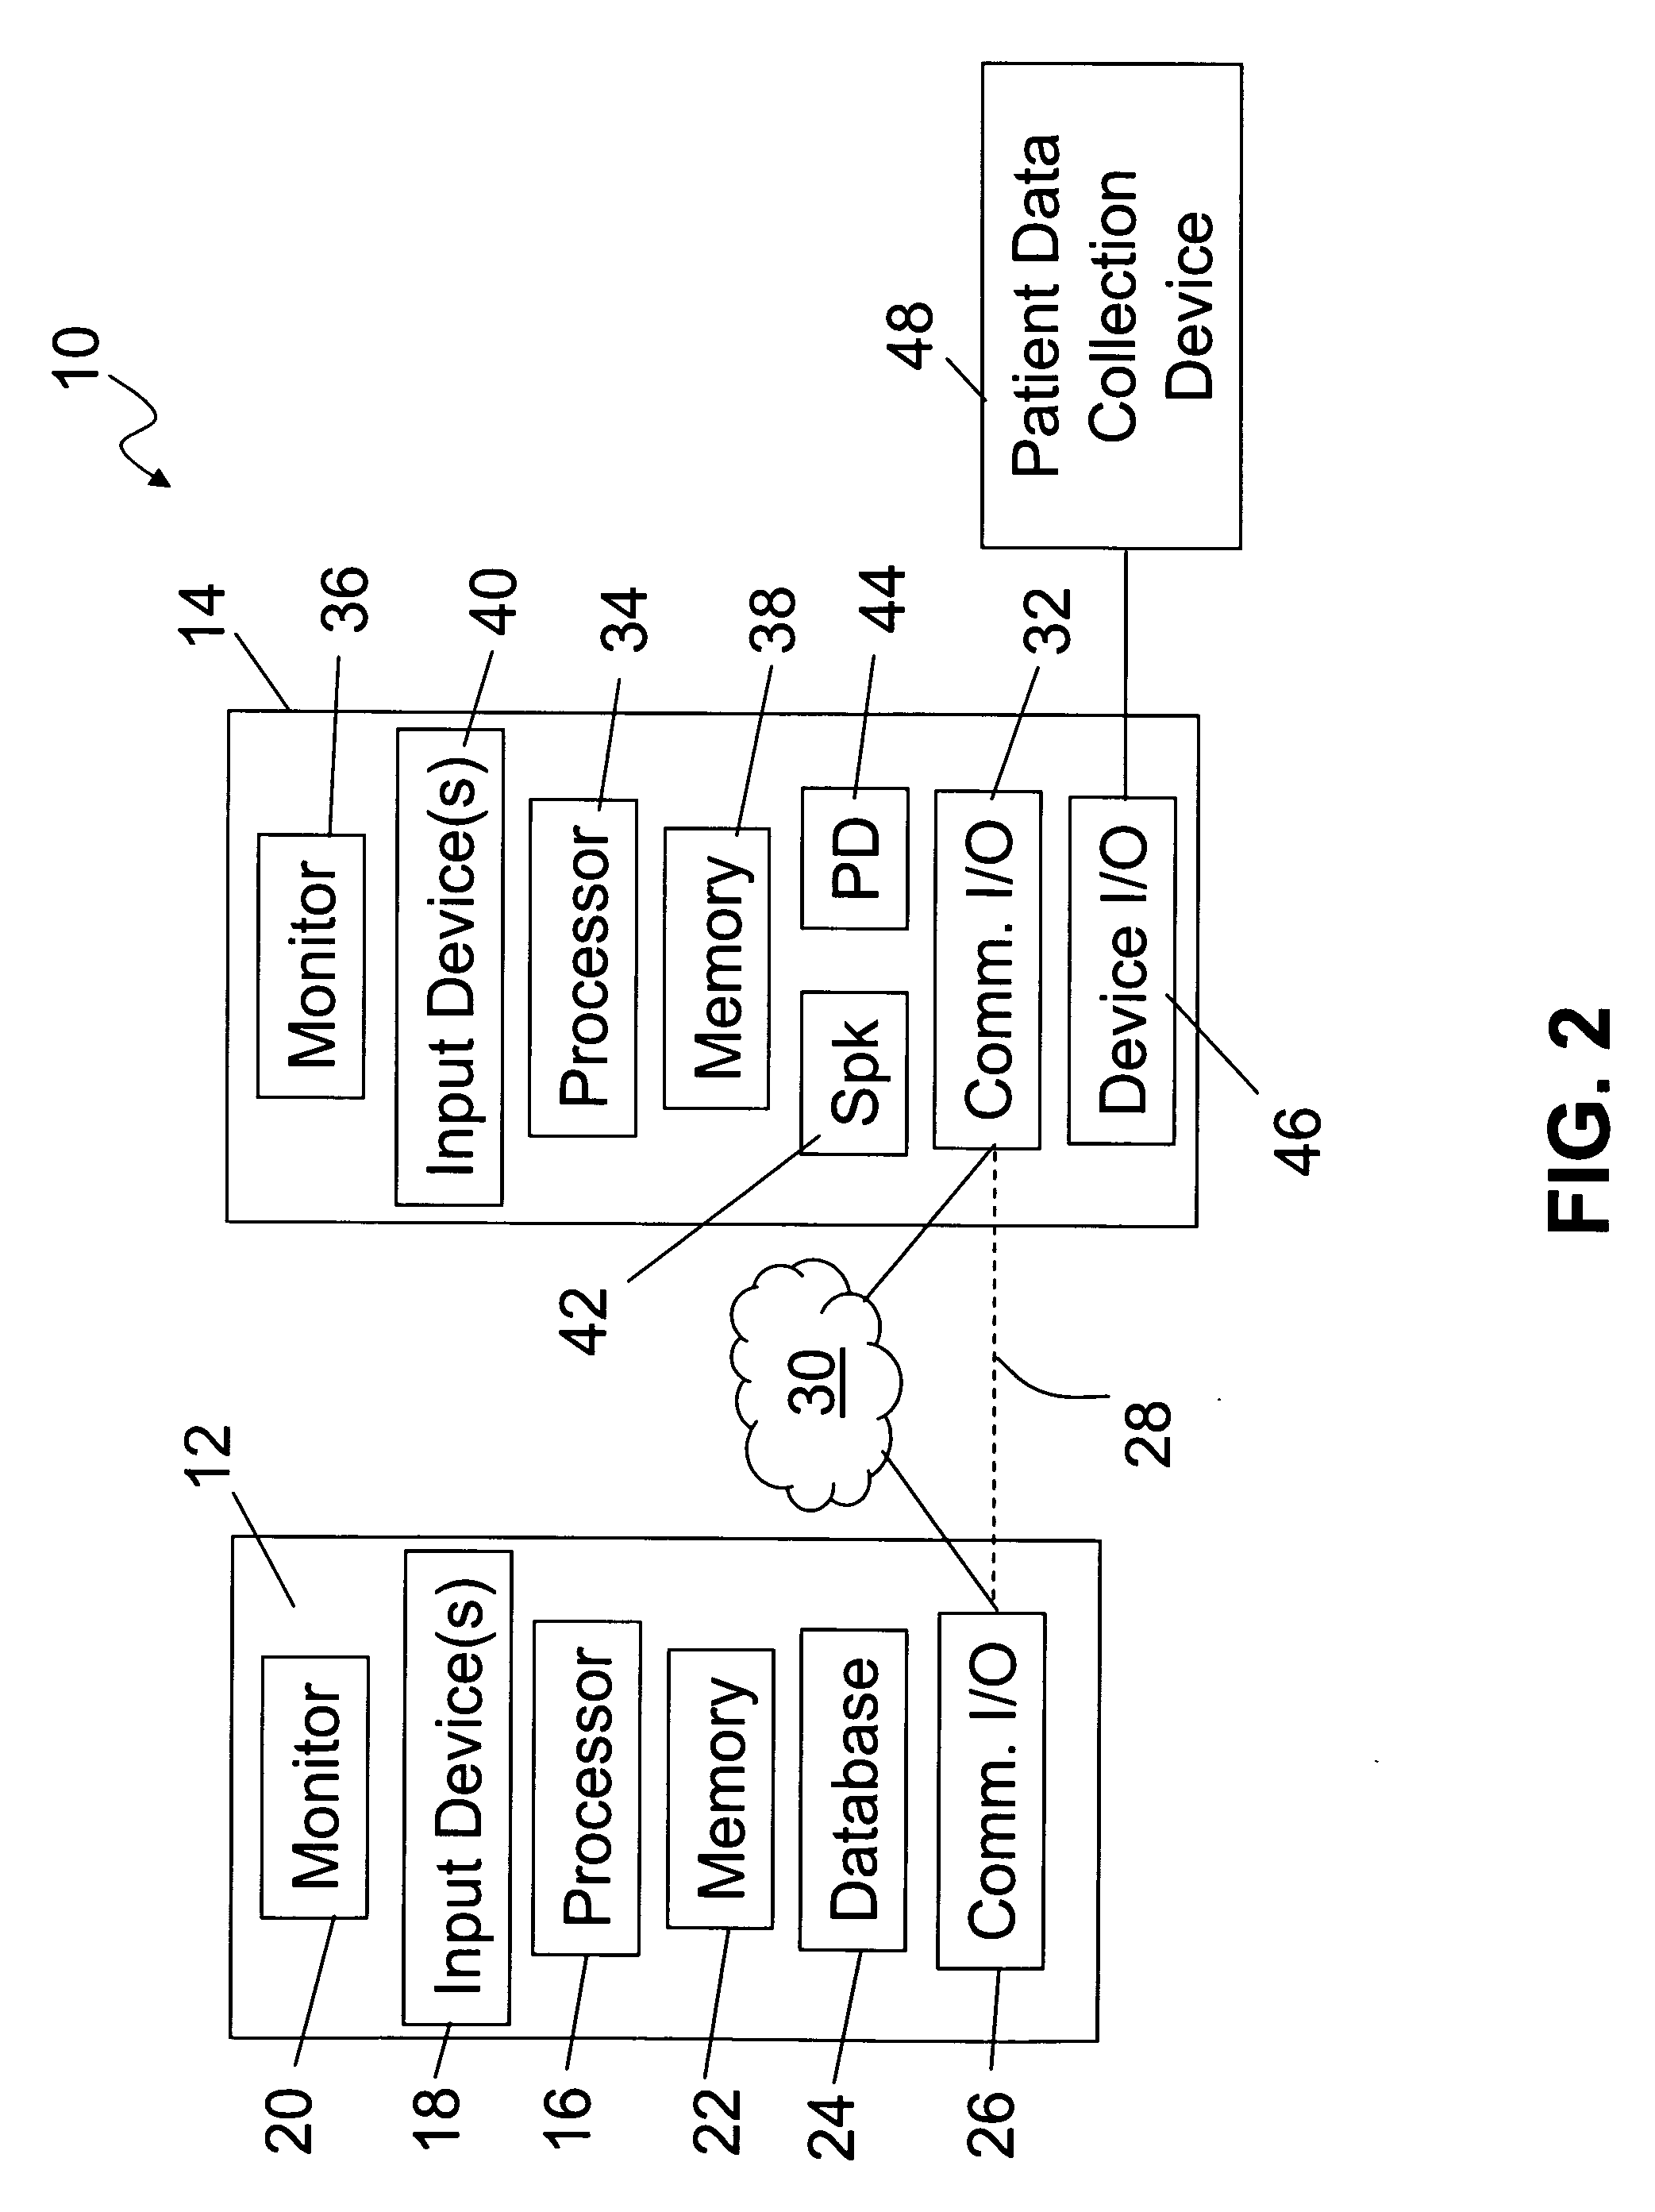 System for developing patient specific therapies based on dynamic modeling of patient physiology and method thereof